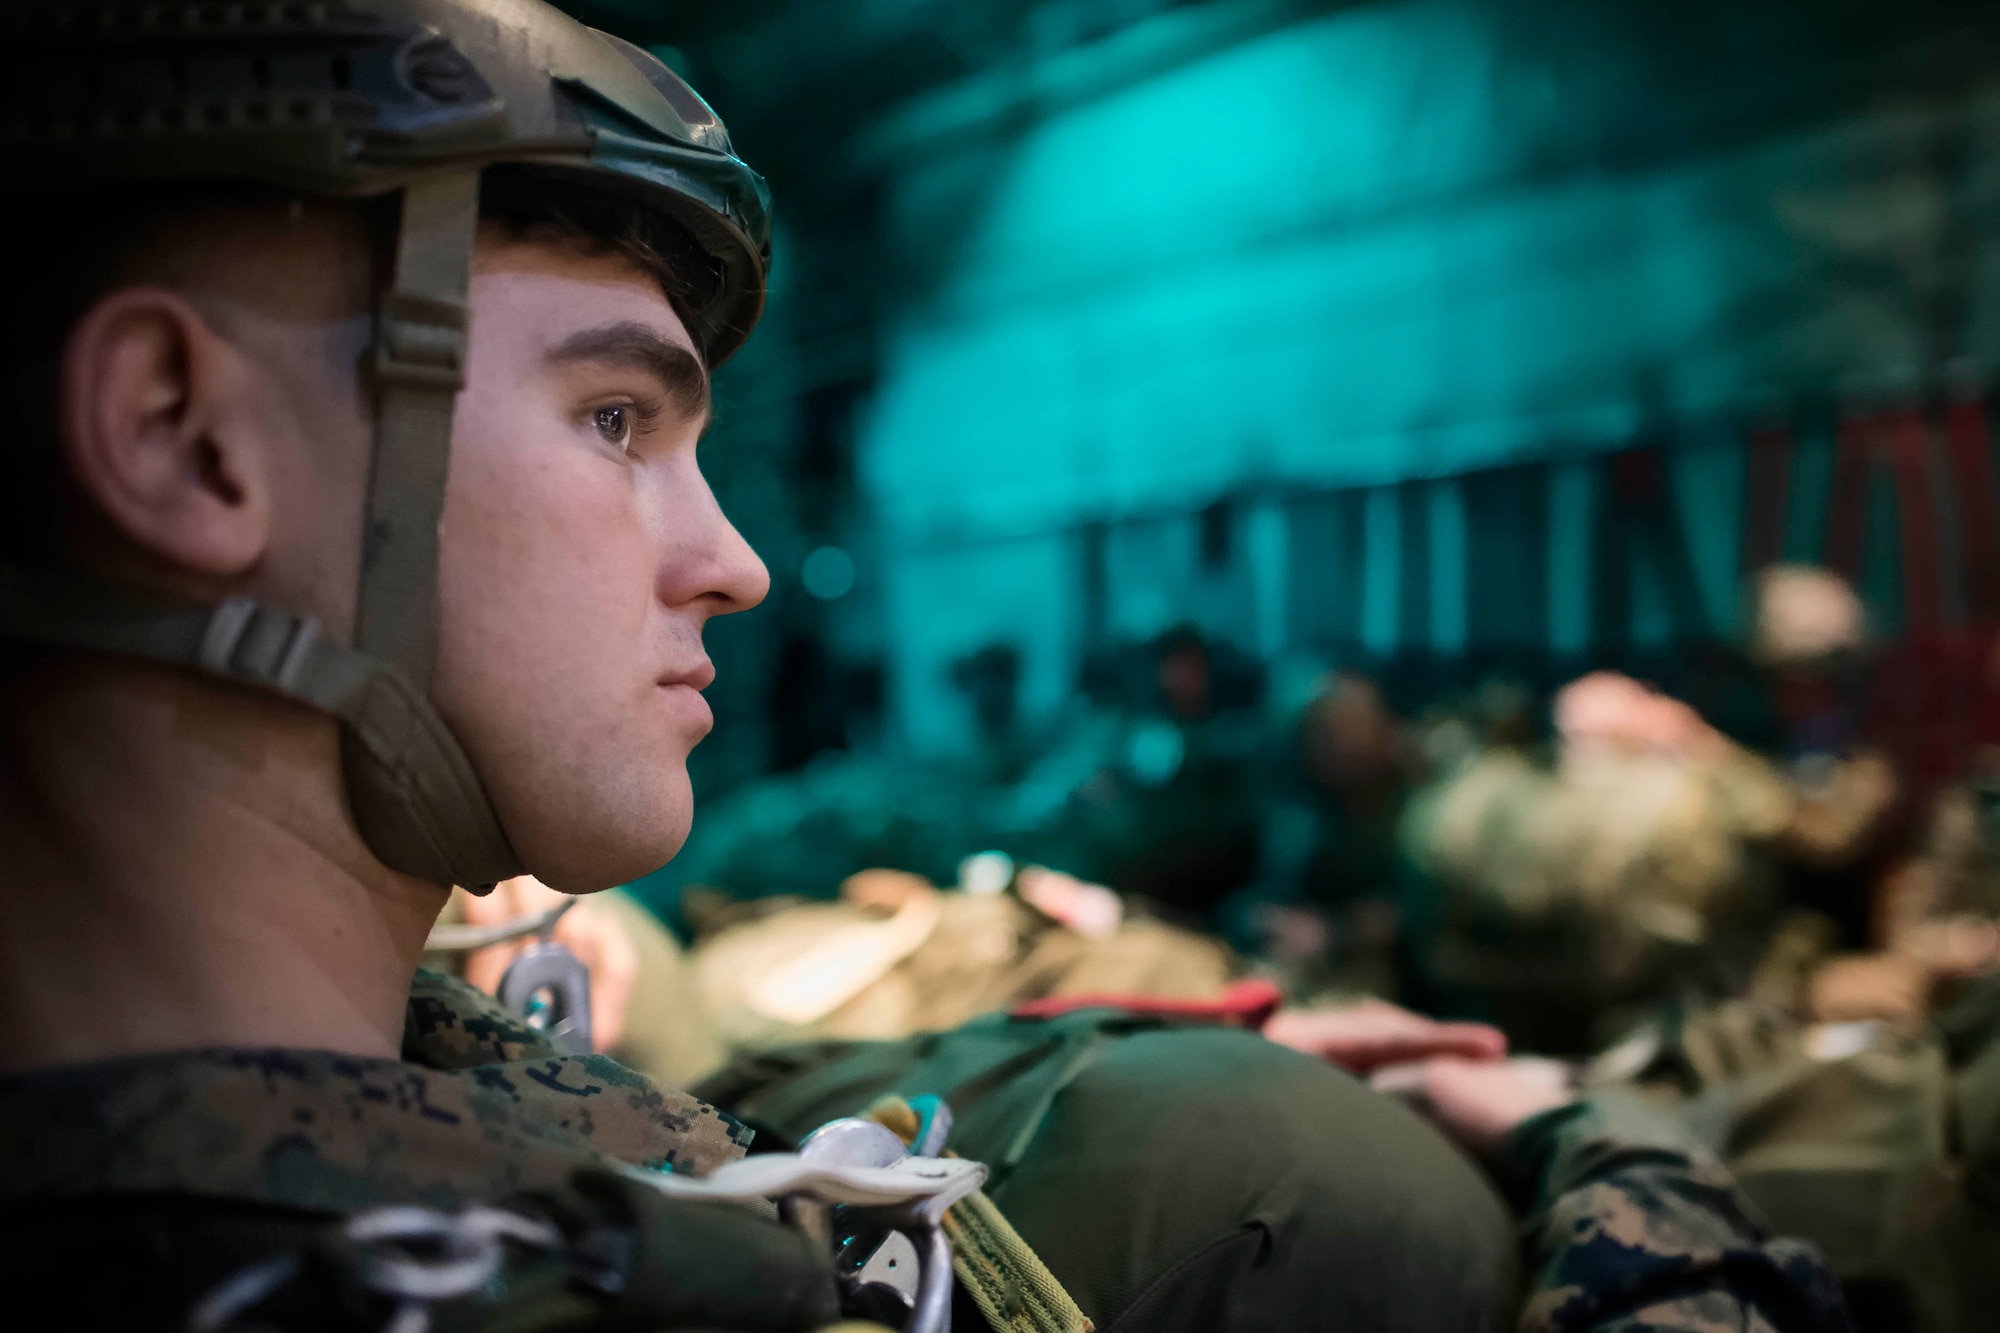 A U.S. Marine, , waits during airborne training aboard an Air Force C-130H Hercules aircraft during jump week at Yokota Air Base, Japan, March 23, 2017. The training not only allowed the Marines to practice jumping, but it also allowed the Yokota aircrews to practice flight tactics and timed-package drops. (U.S. Air Force photo by Yasuo Osakabe)